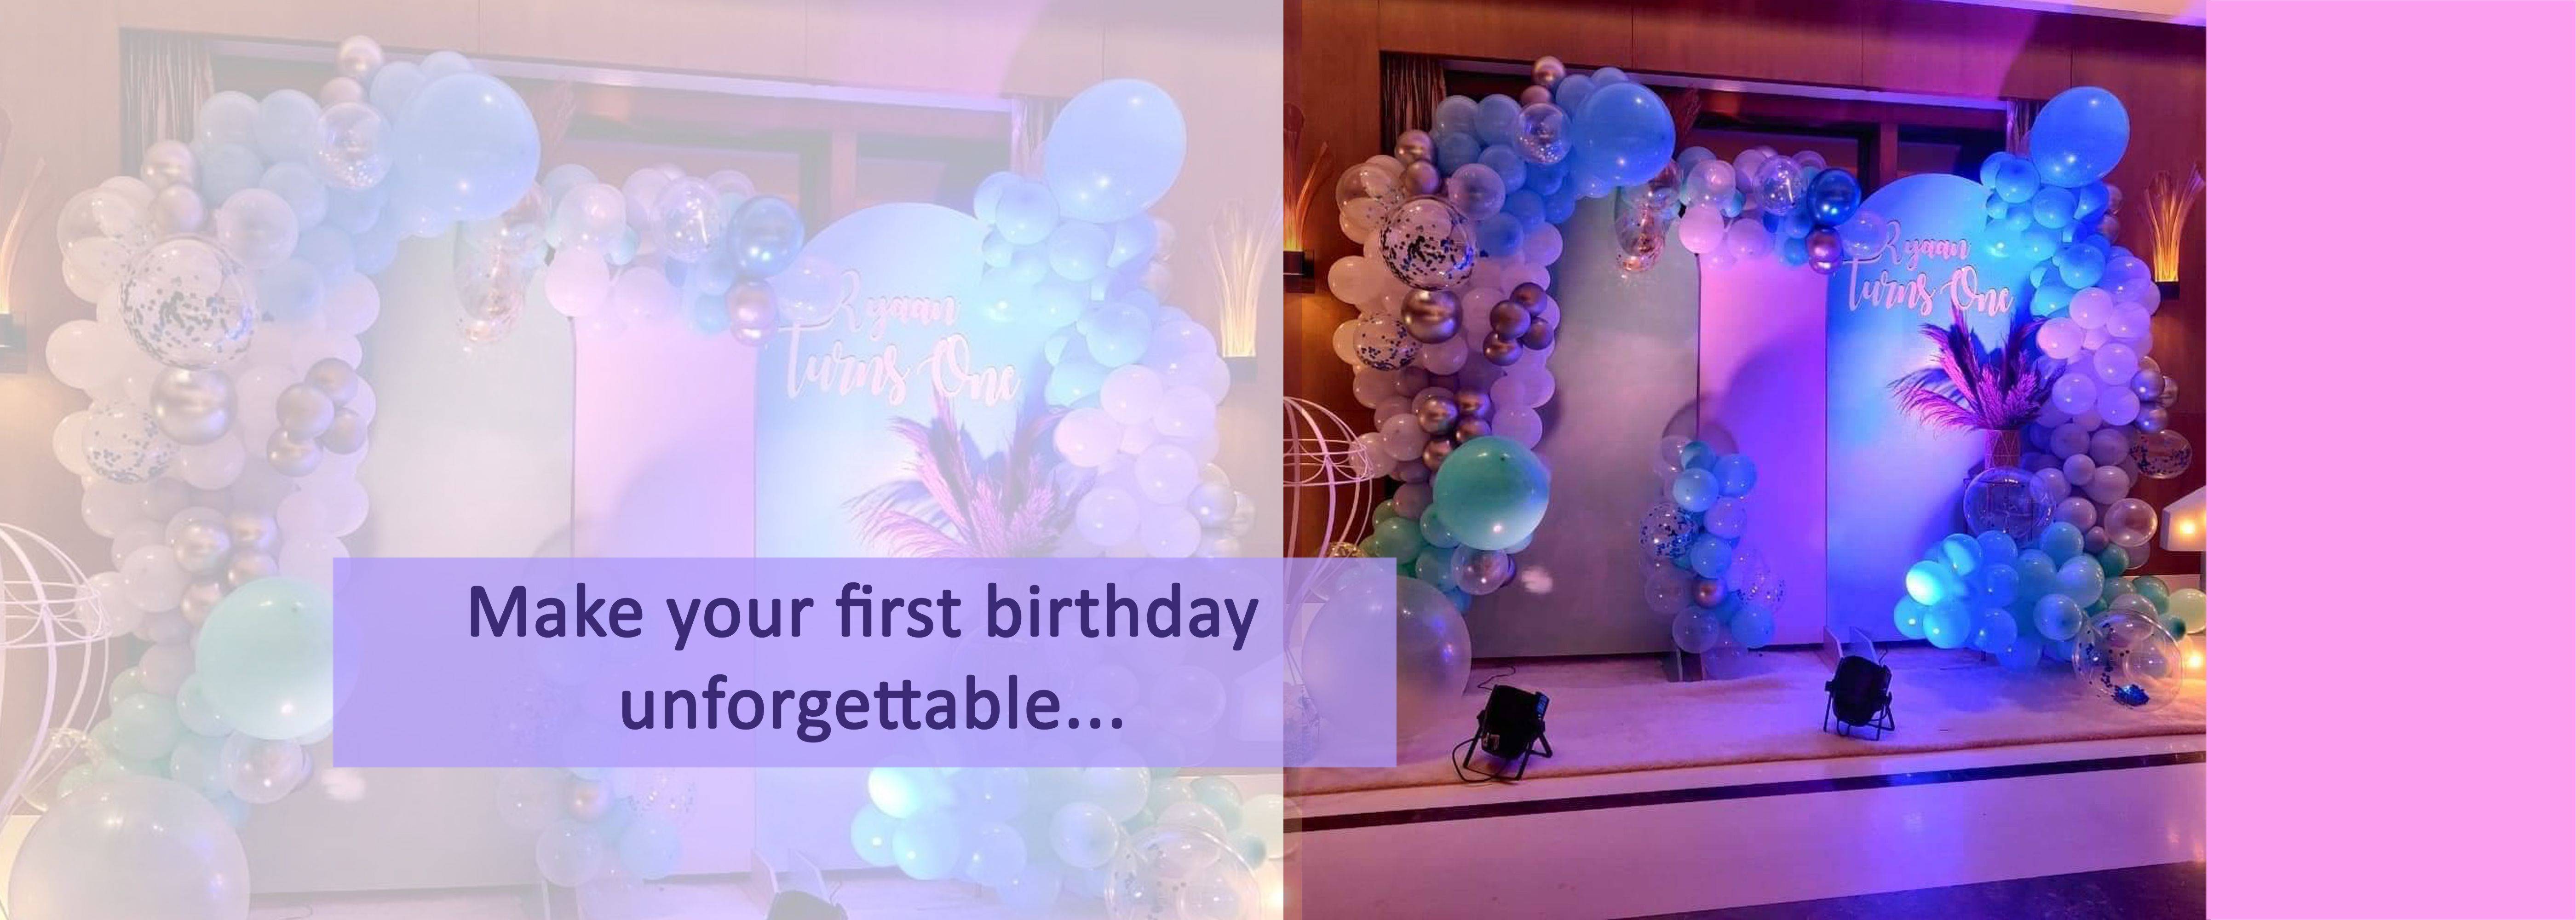 Baby Shark Theme Party Planner In Delhi NCR